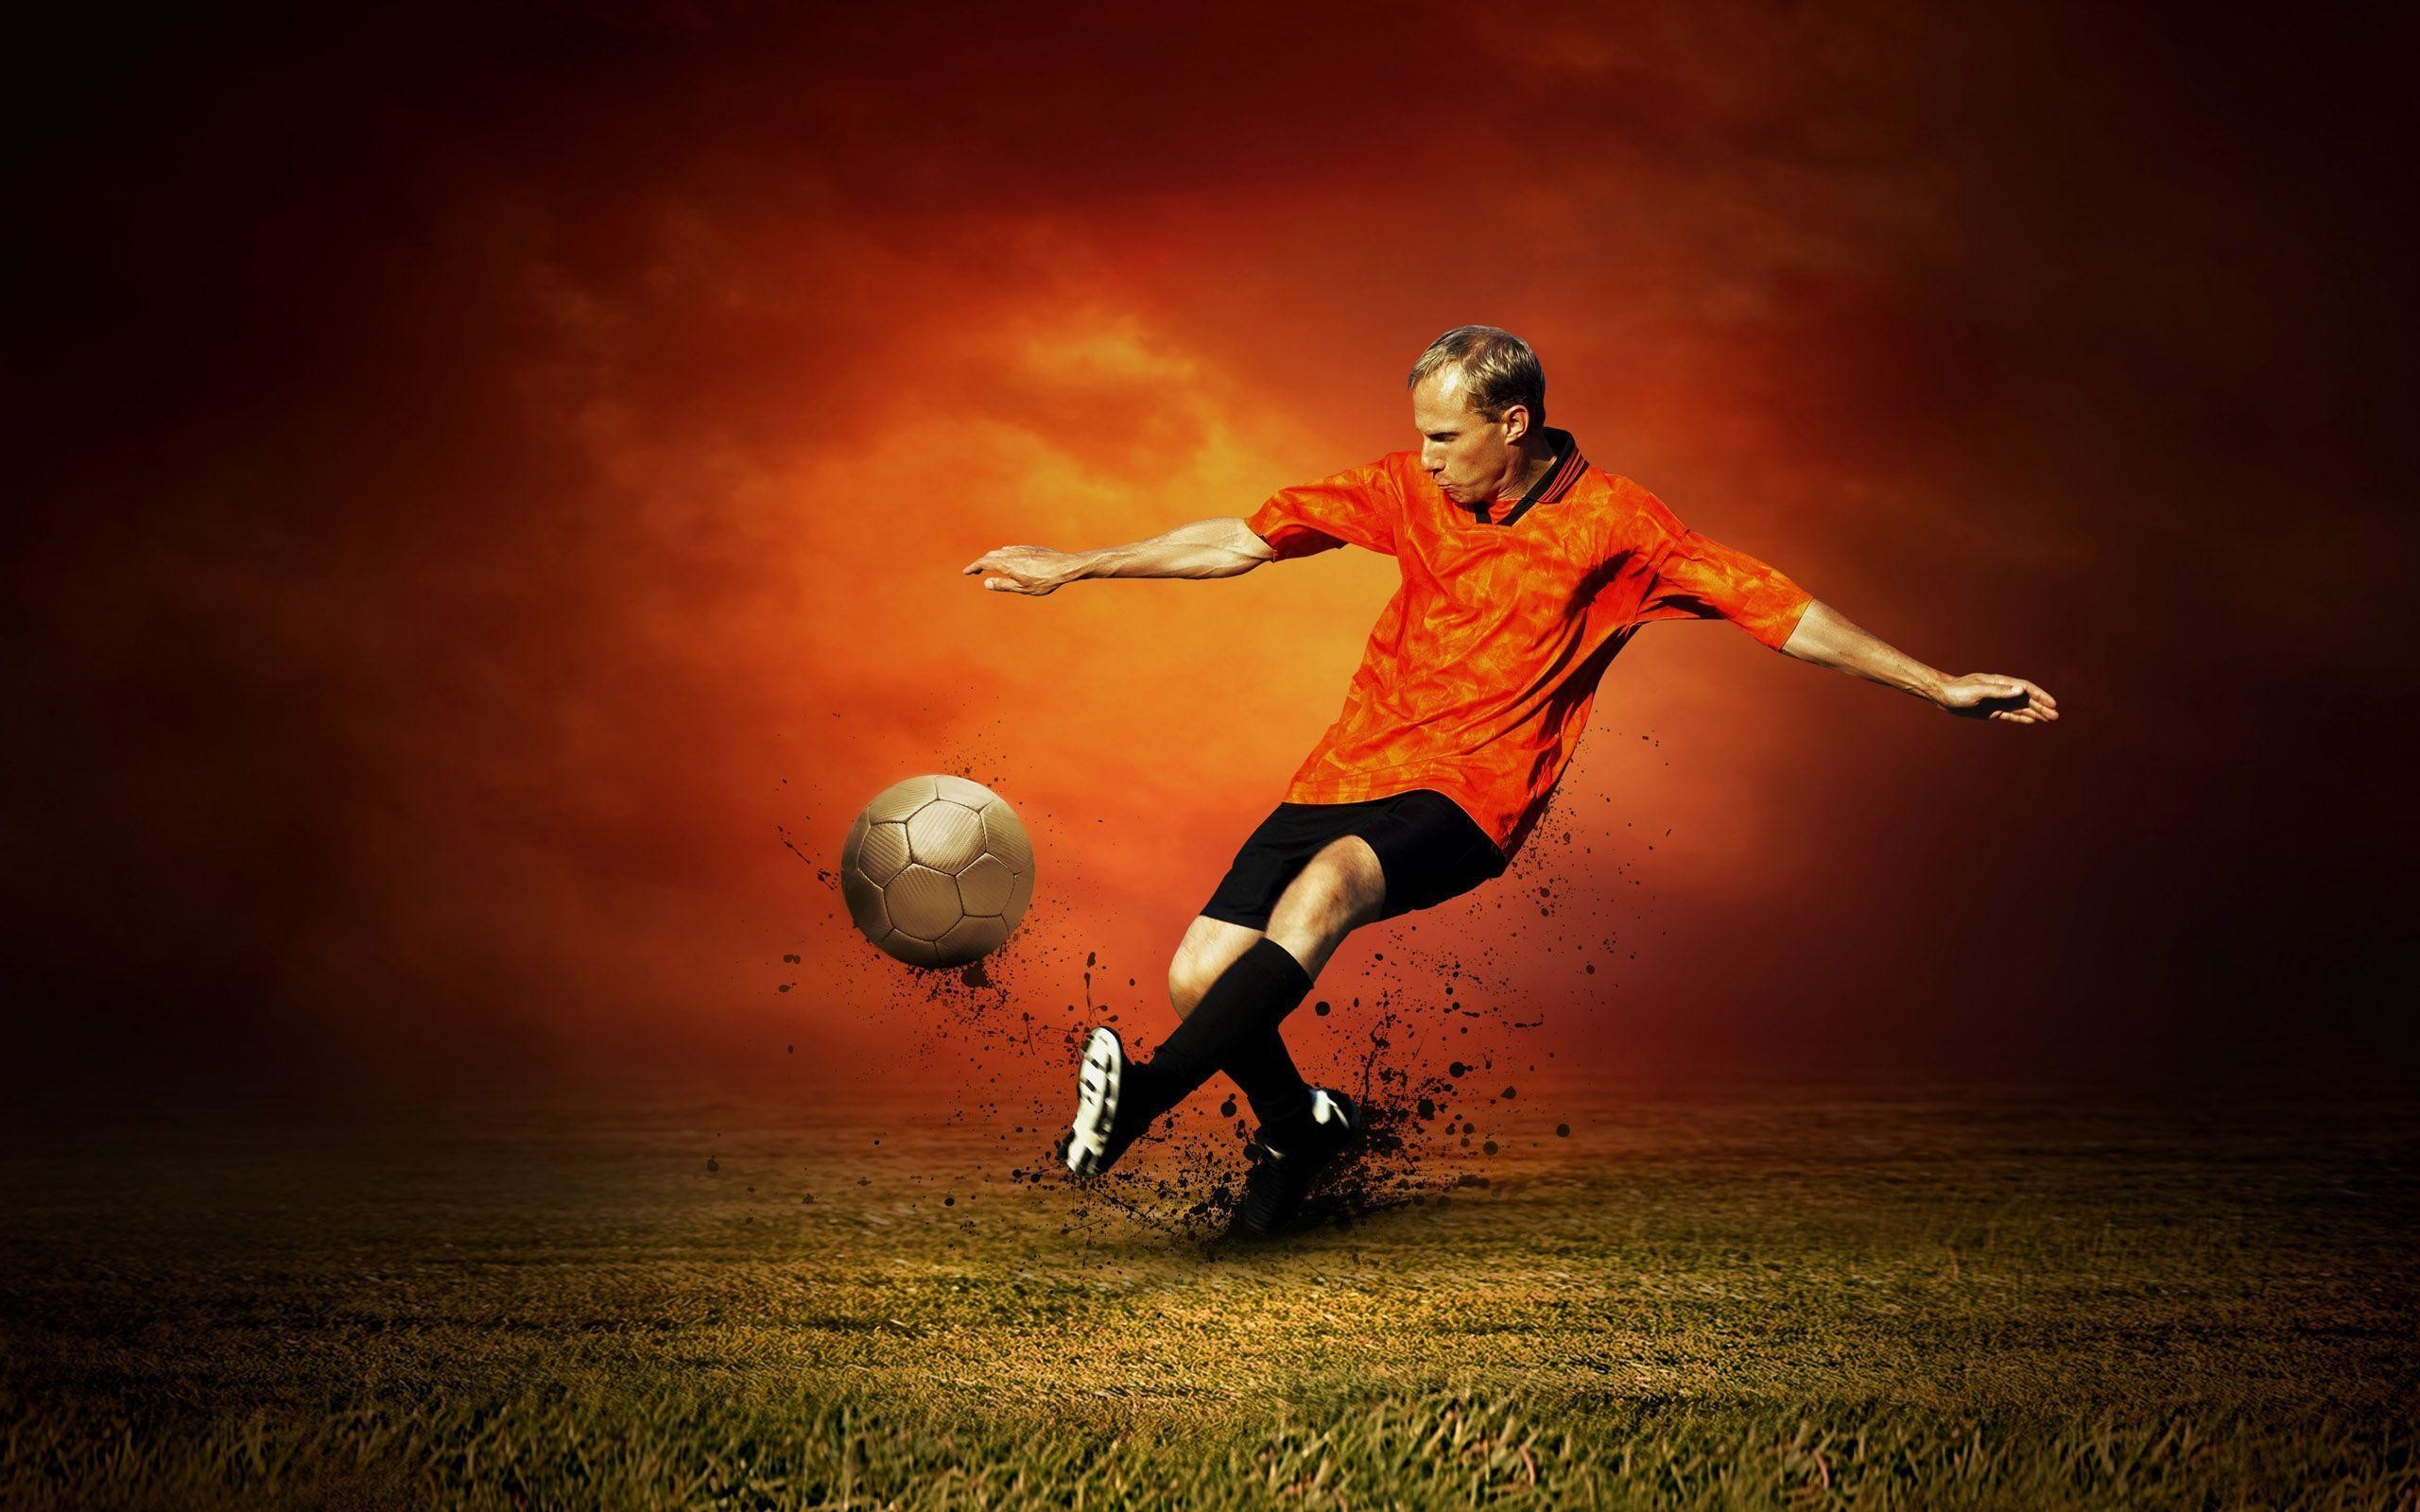 2560x1600 Cool Soccer Backgrounds Images & Pictures - Becuo